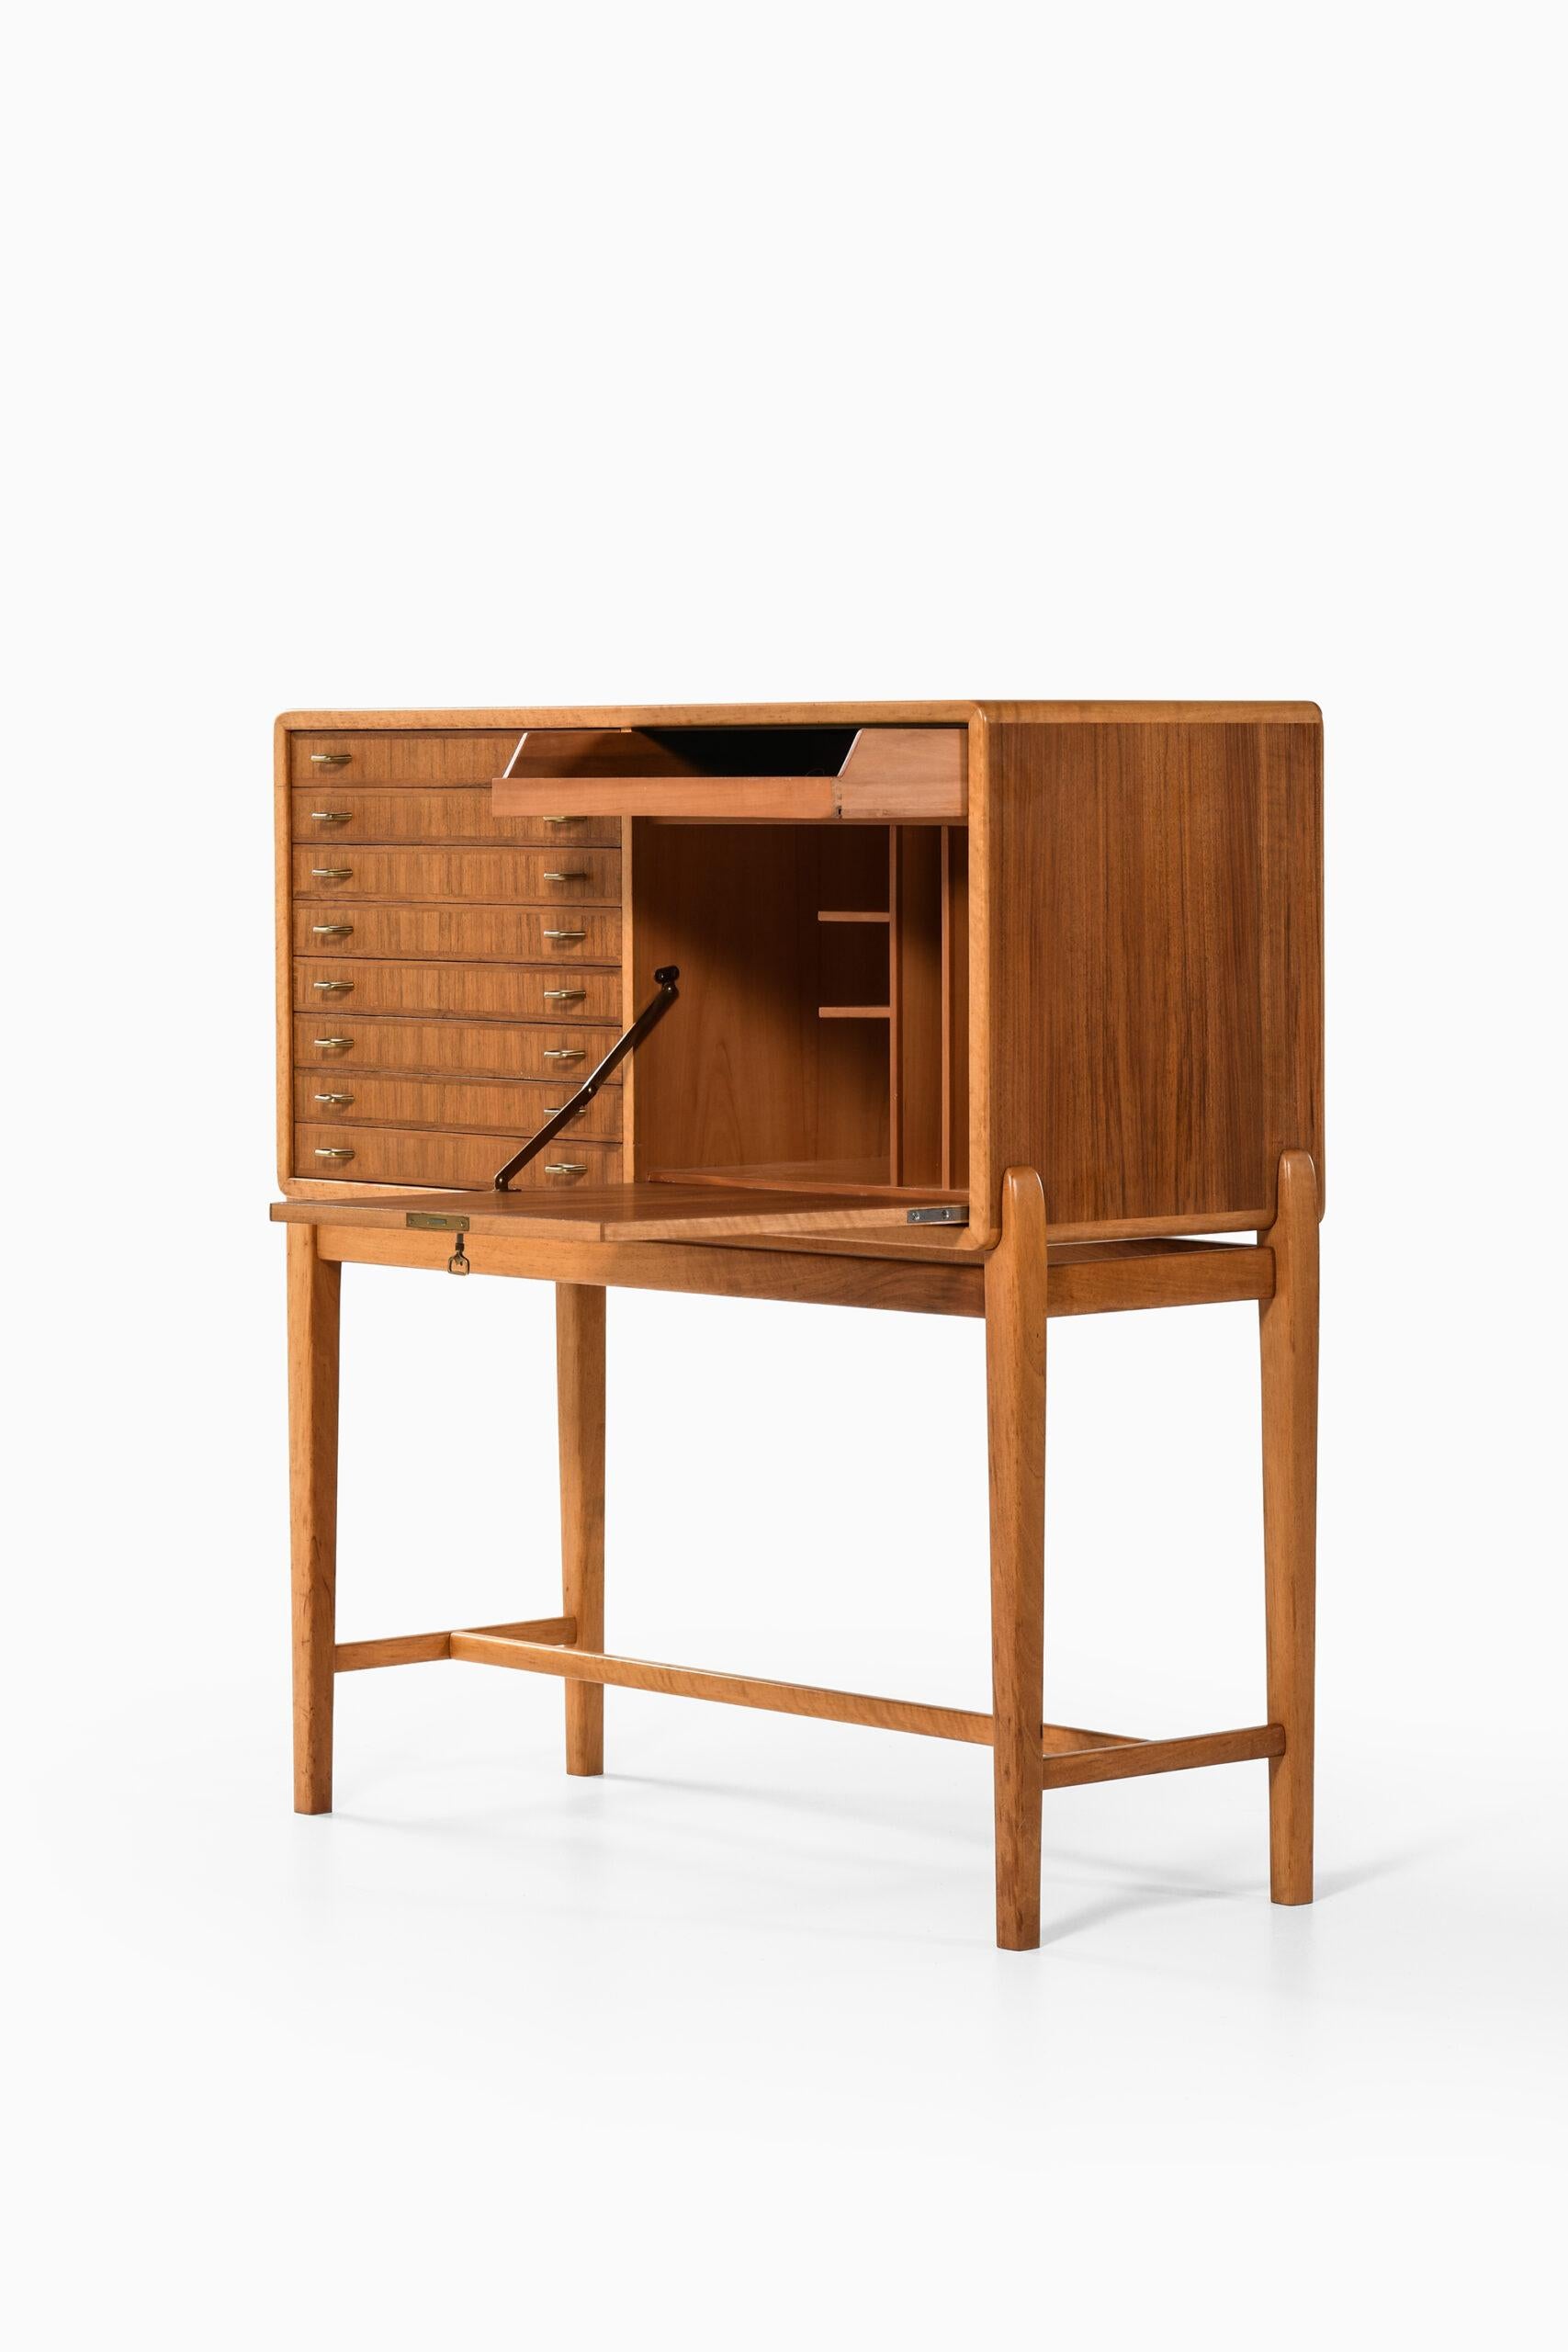 Mid-20th Century Cabinet Attributed to Carl-Axel Acking Produced in Sweden For Sale